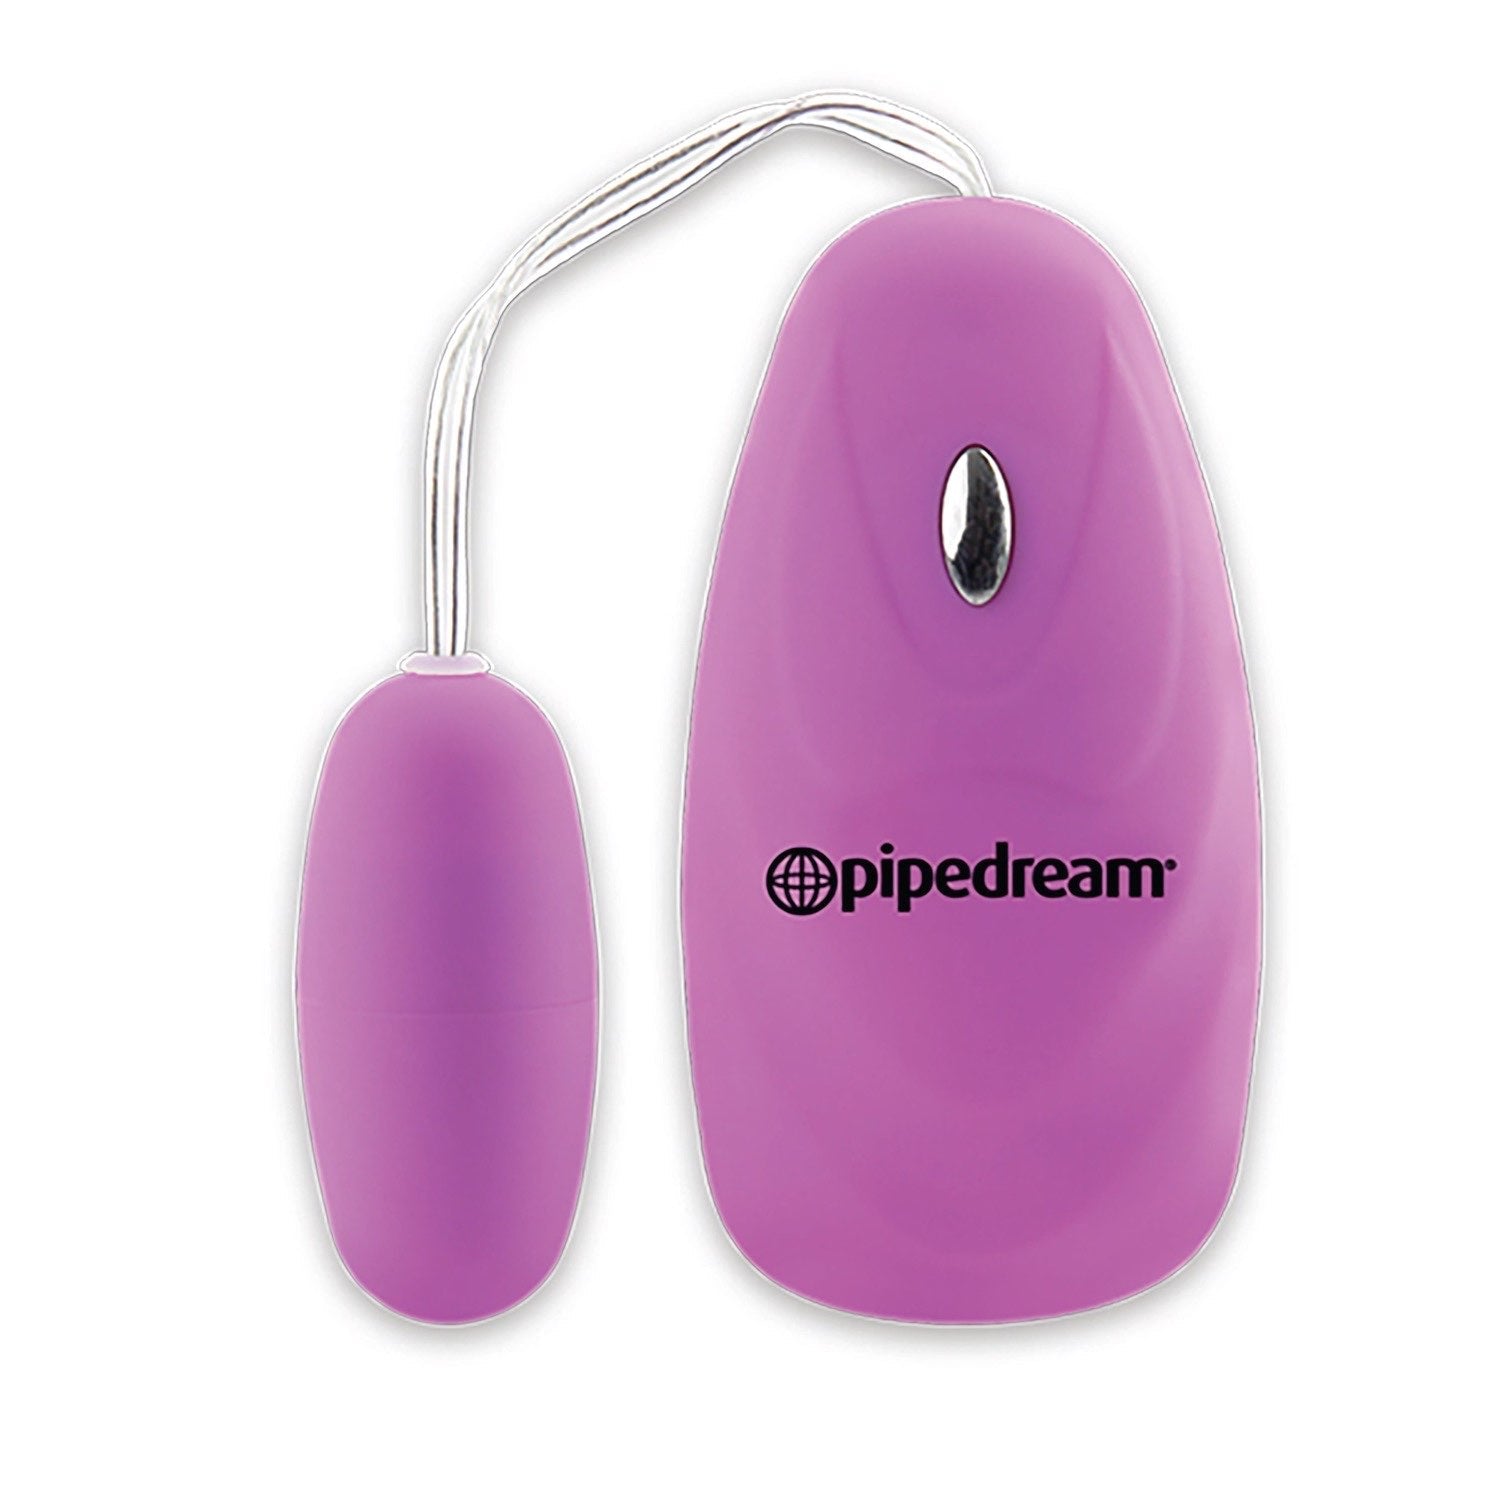 Luv Touch Neon 5 Function Bullet - Purple 5.7 cm (2.25&quot;) Bullet by Pipedream